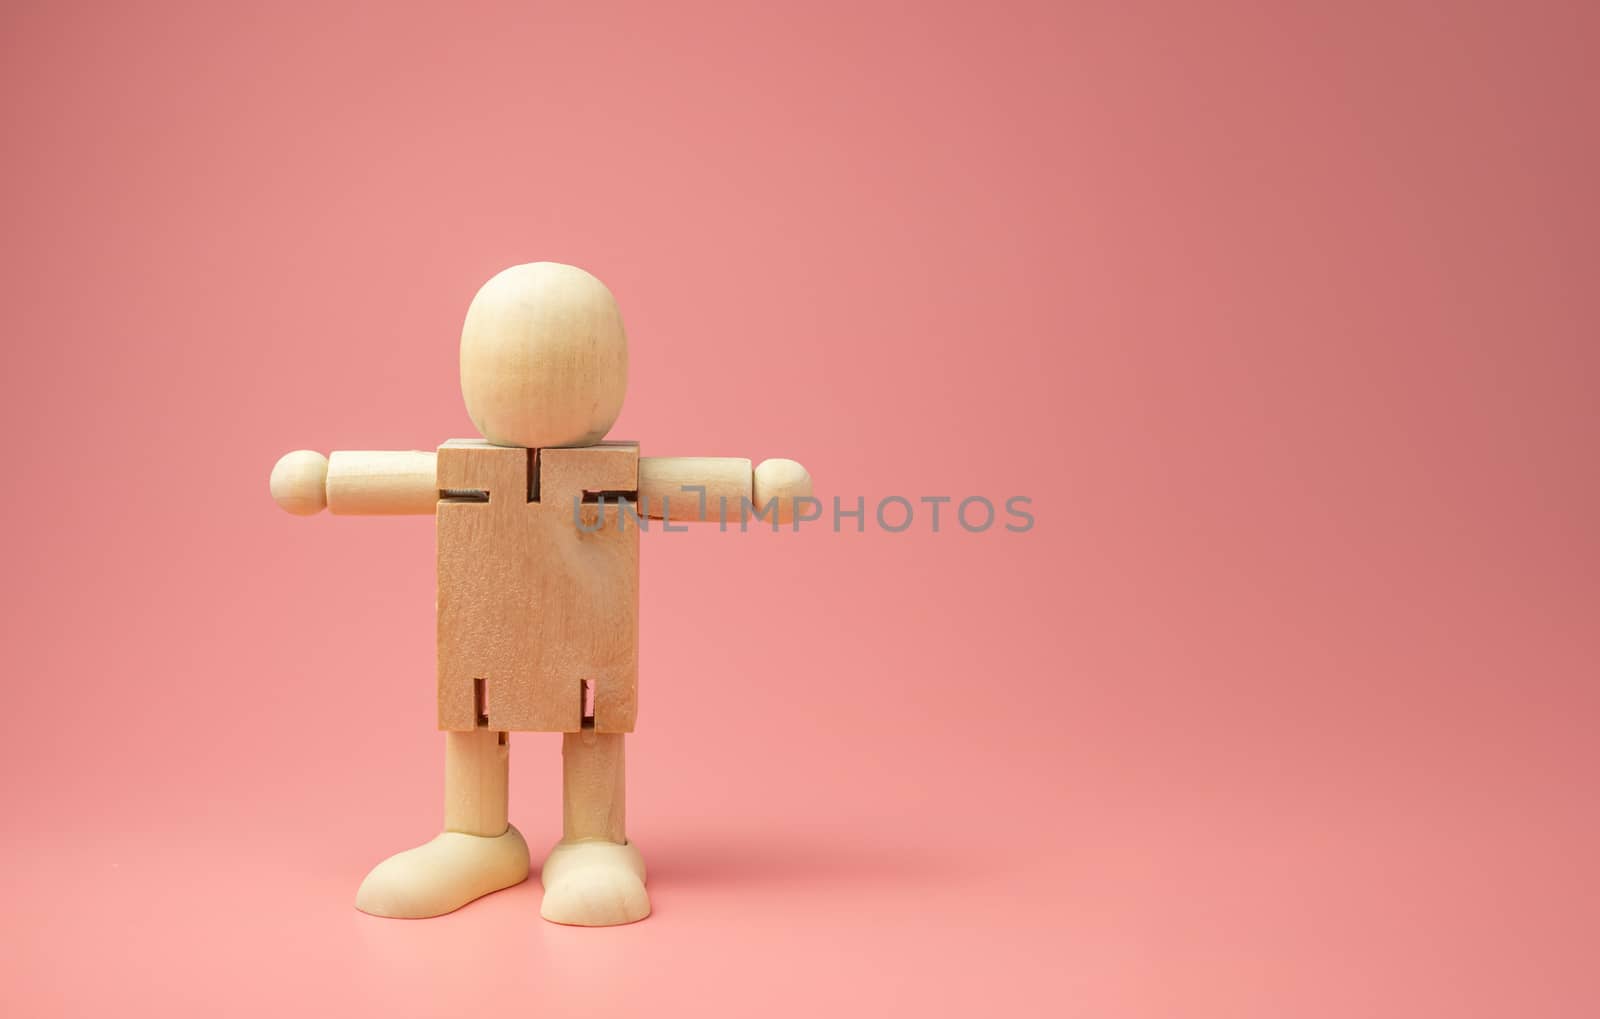 A Wooden doll on pink background. 
keep distance concept.